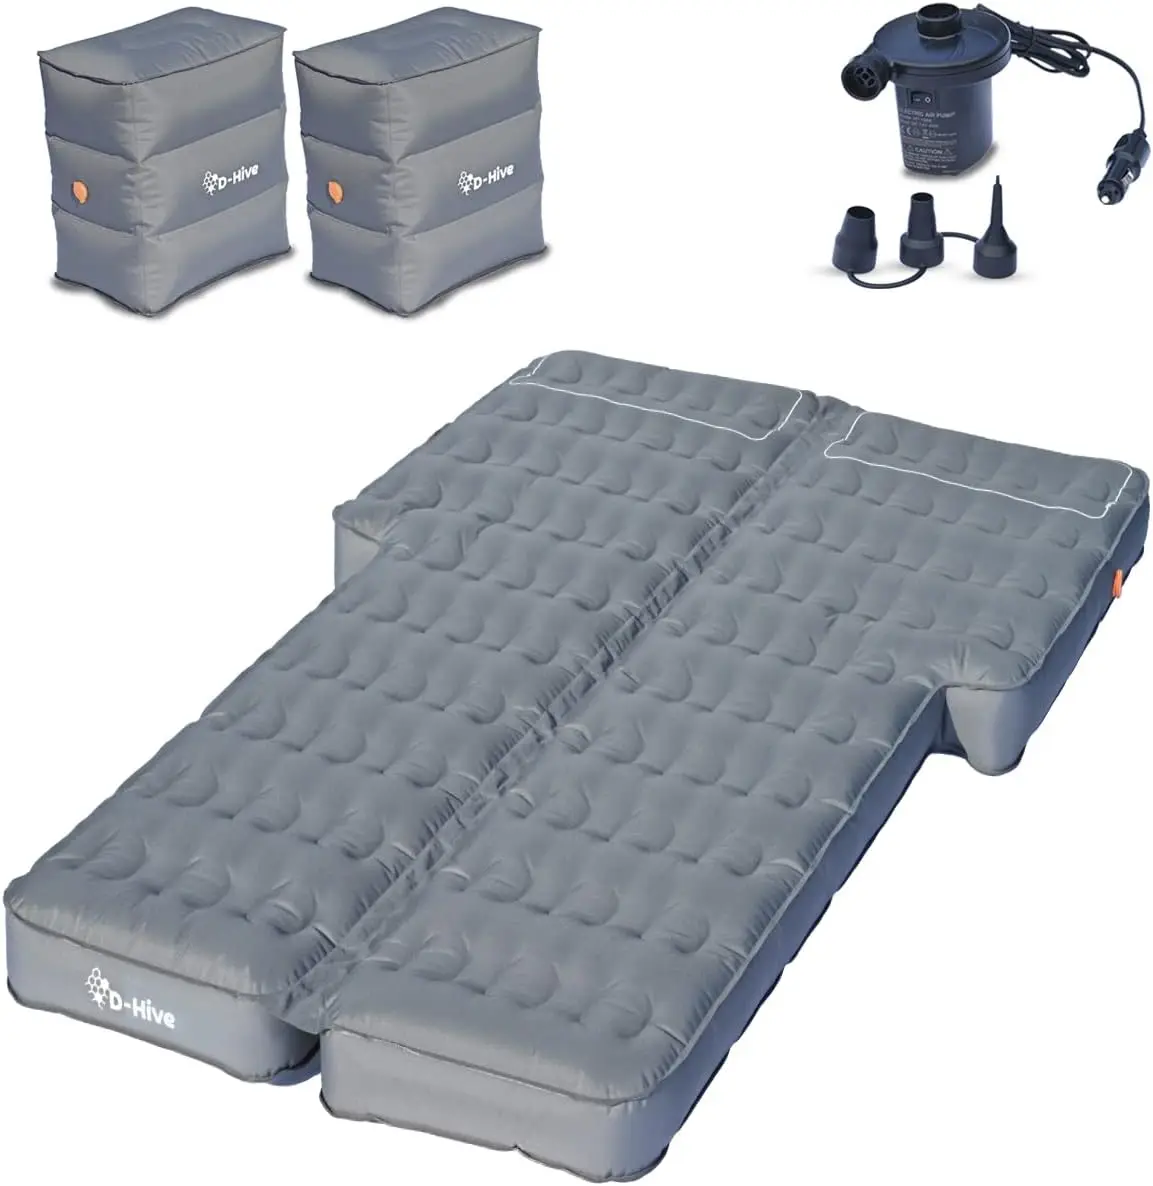 

Air Mattress for Car Camping, Comfy & Durable Extra Thick 300D Oxford Fabric, 3-Layer Valve, Quick and Easy Set-Up w/ , Car